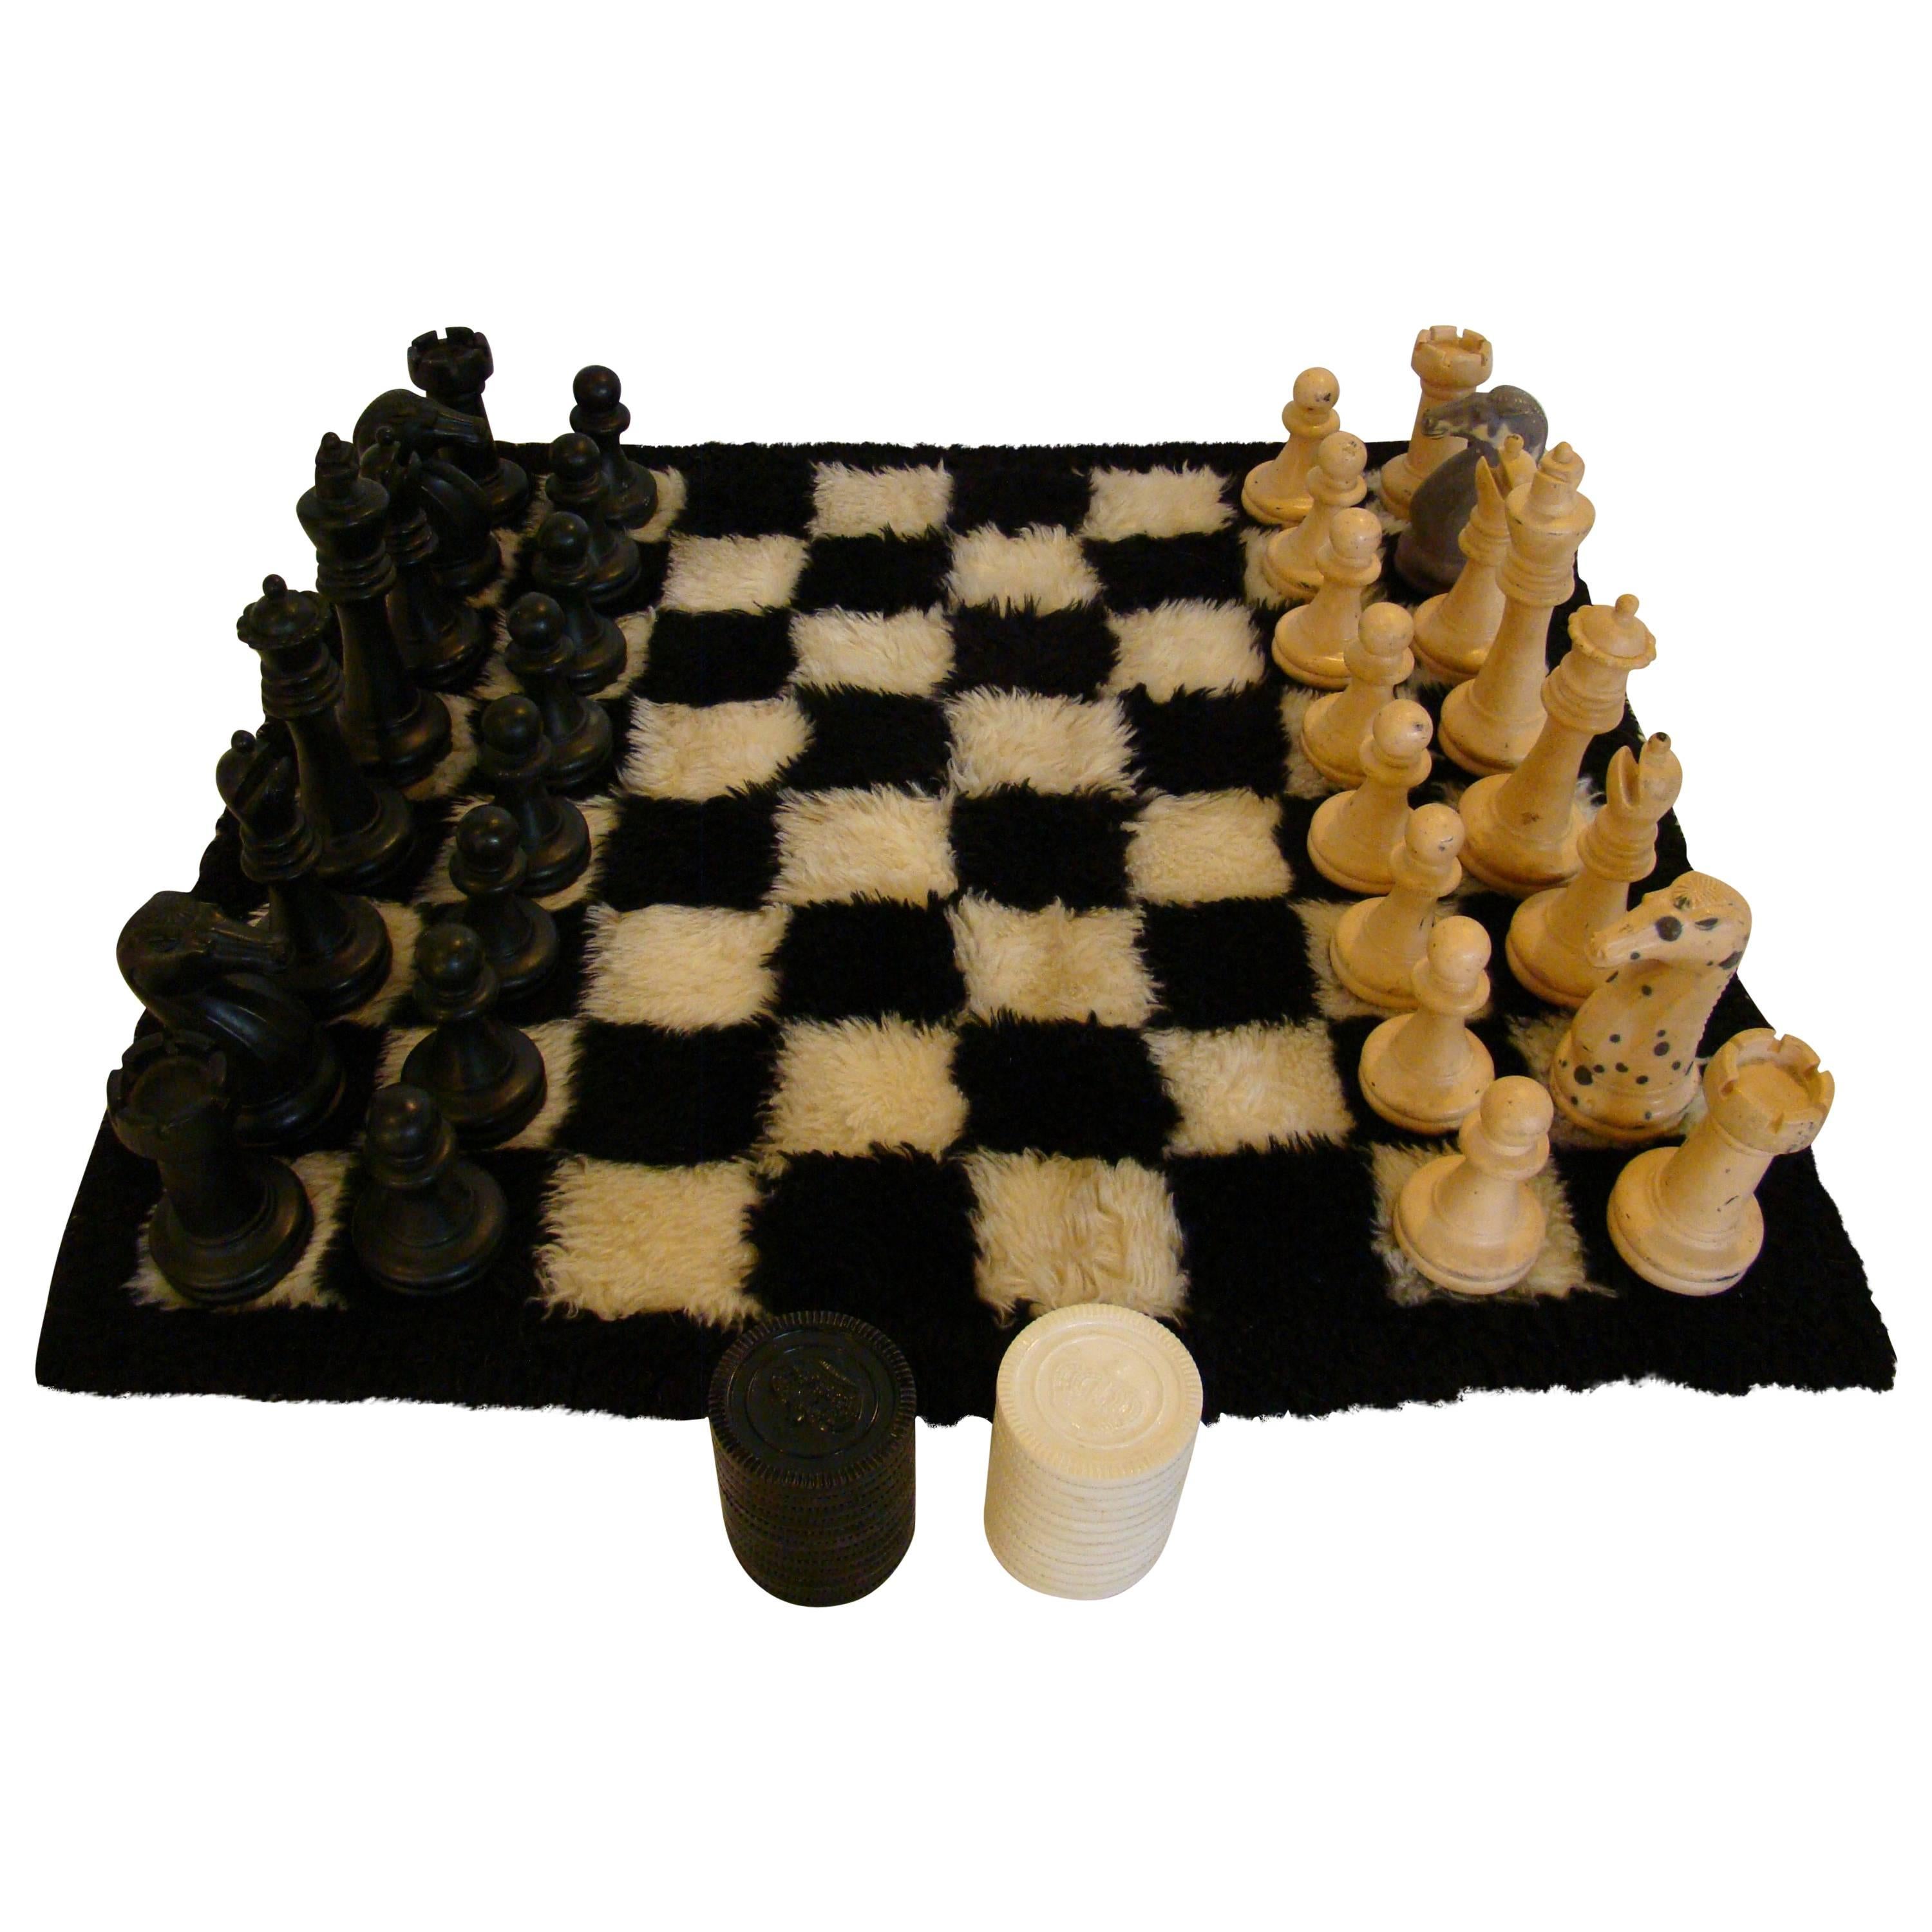 High End Chess Kit French Retro Plaid Study Decoration Natural